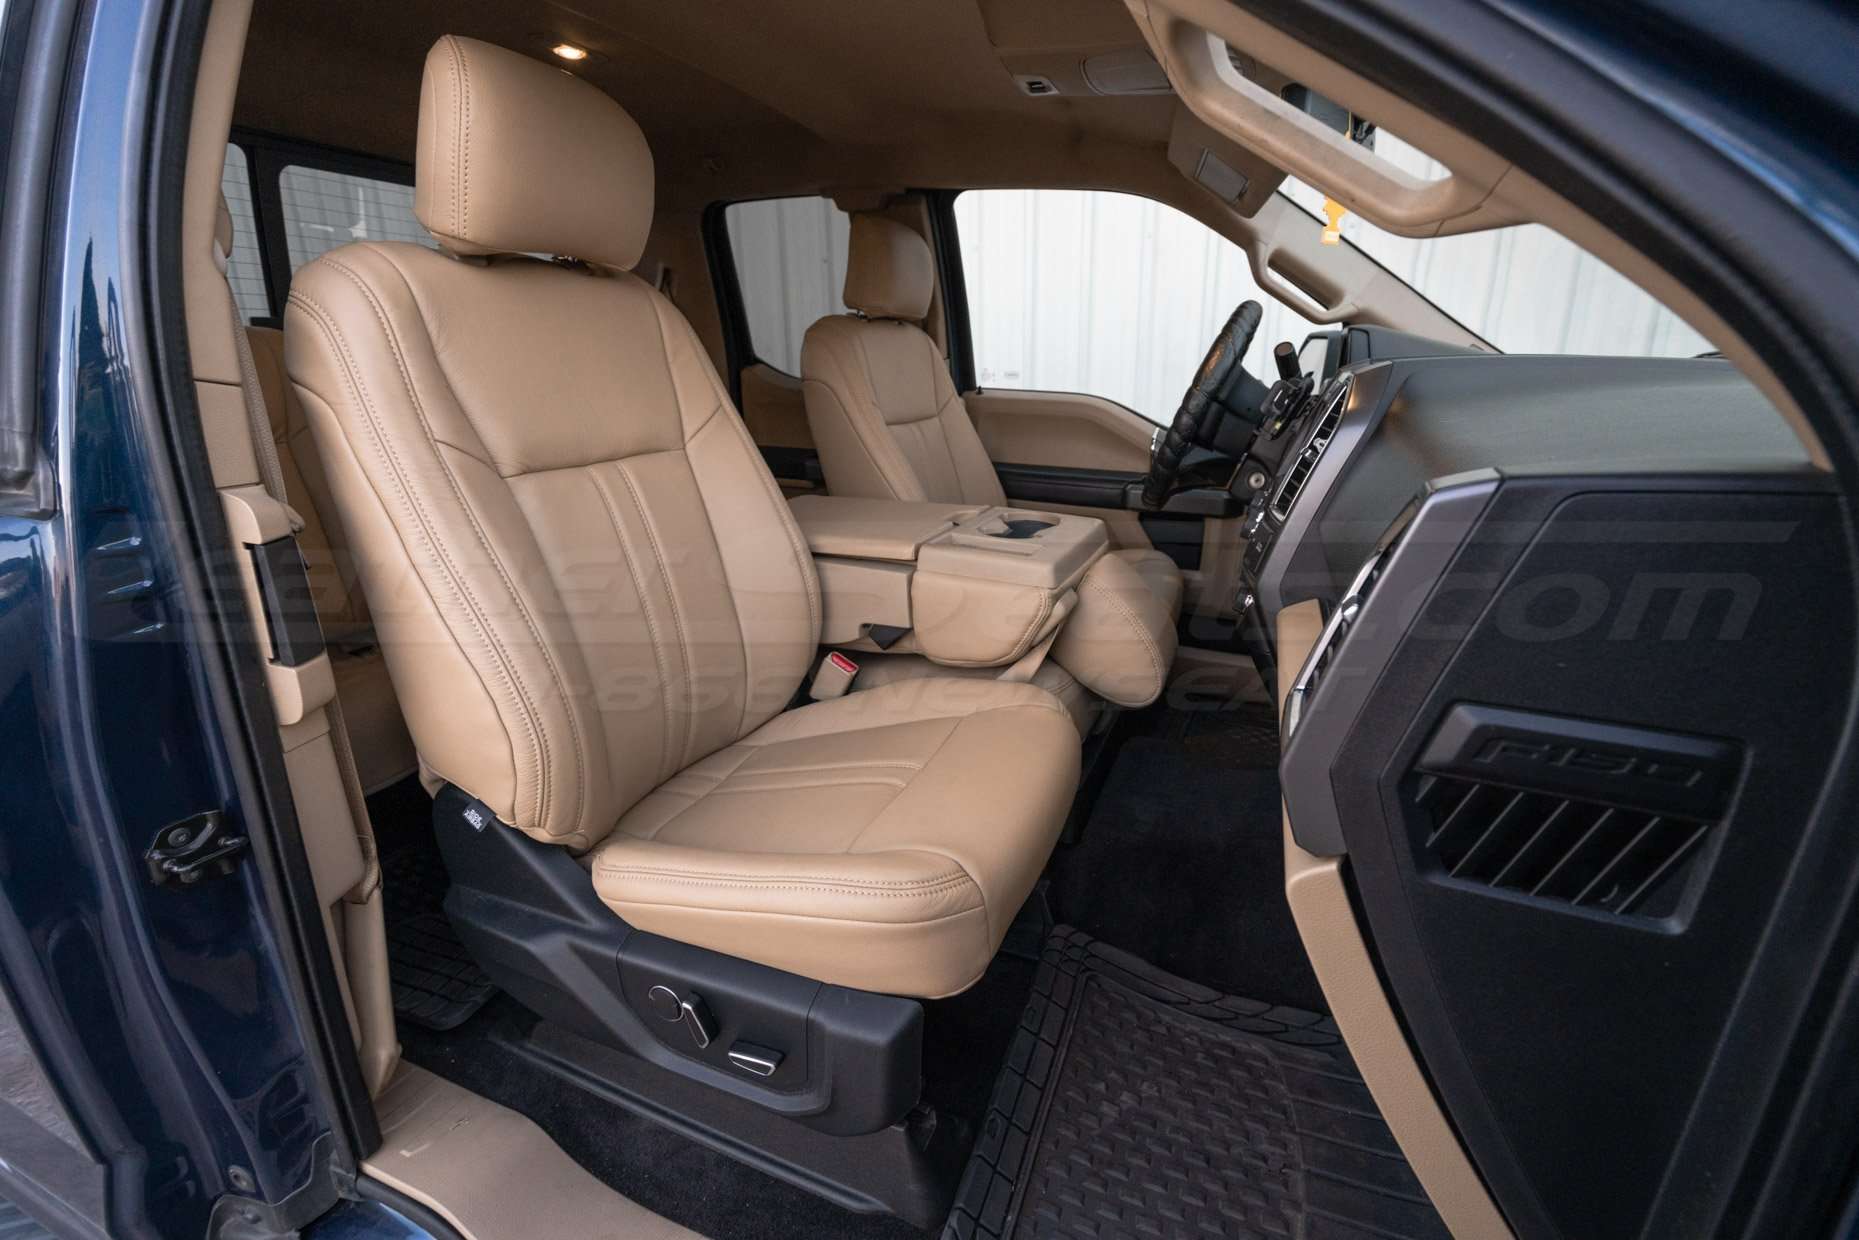 2015-2020 Ford F-150 SuperCab with installed Biaque leather seats - Front passenger seat